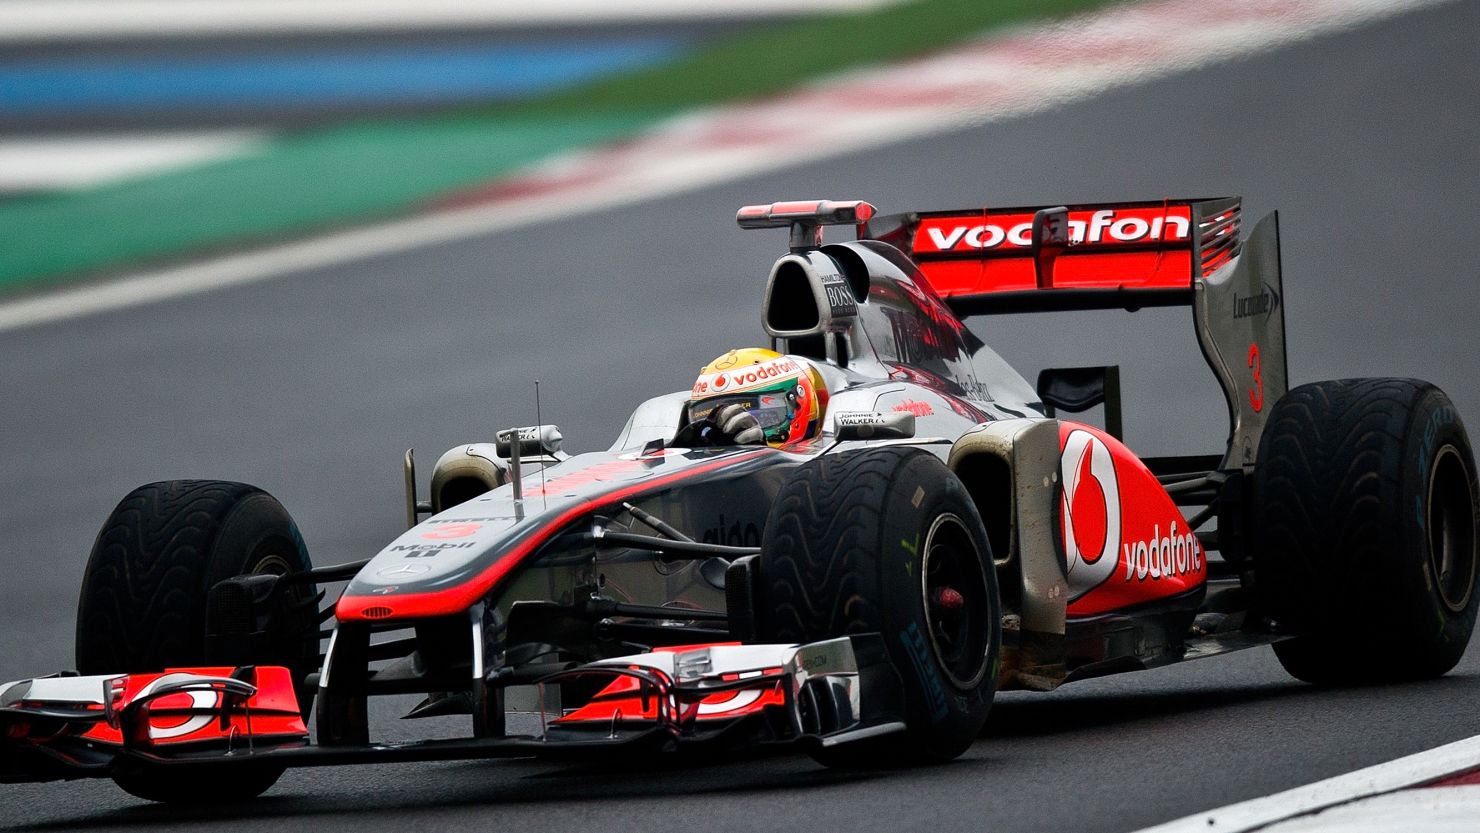 McLaren's Lewis Hamilton has won two grands prix in 2011, in China and Germany.